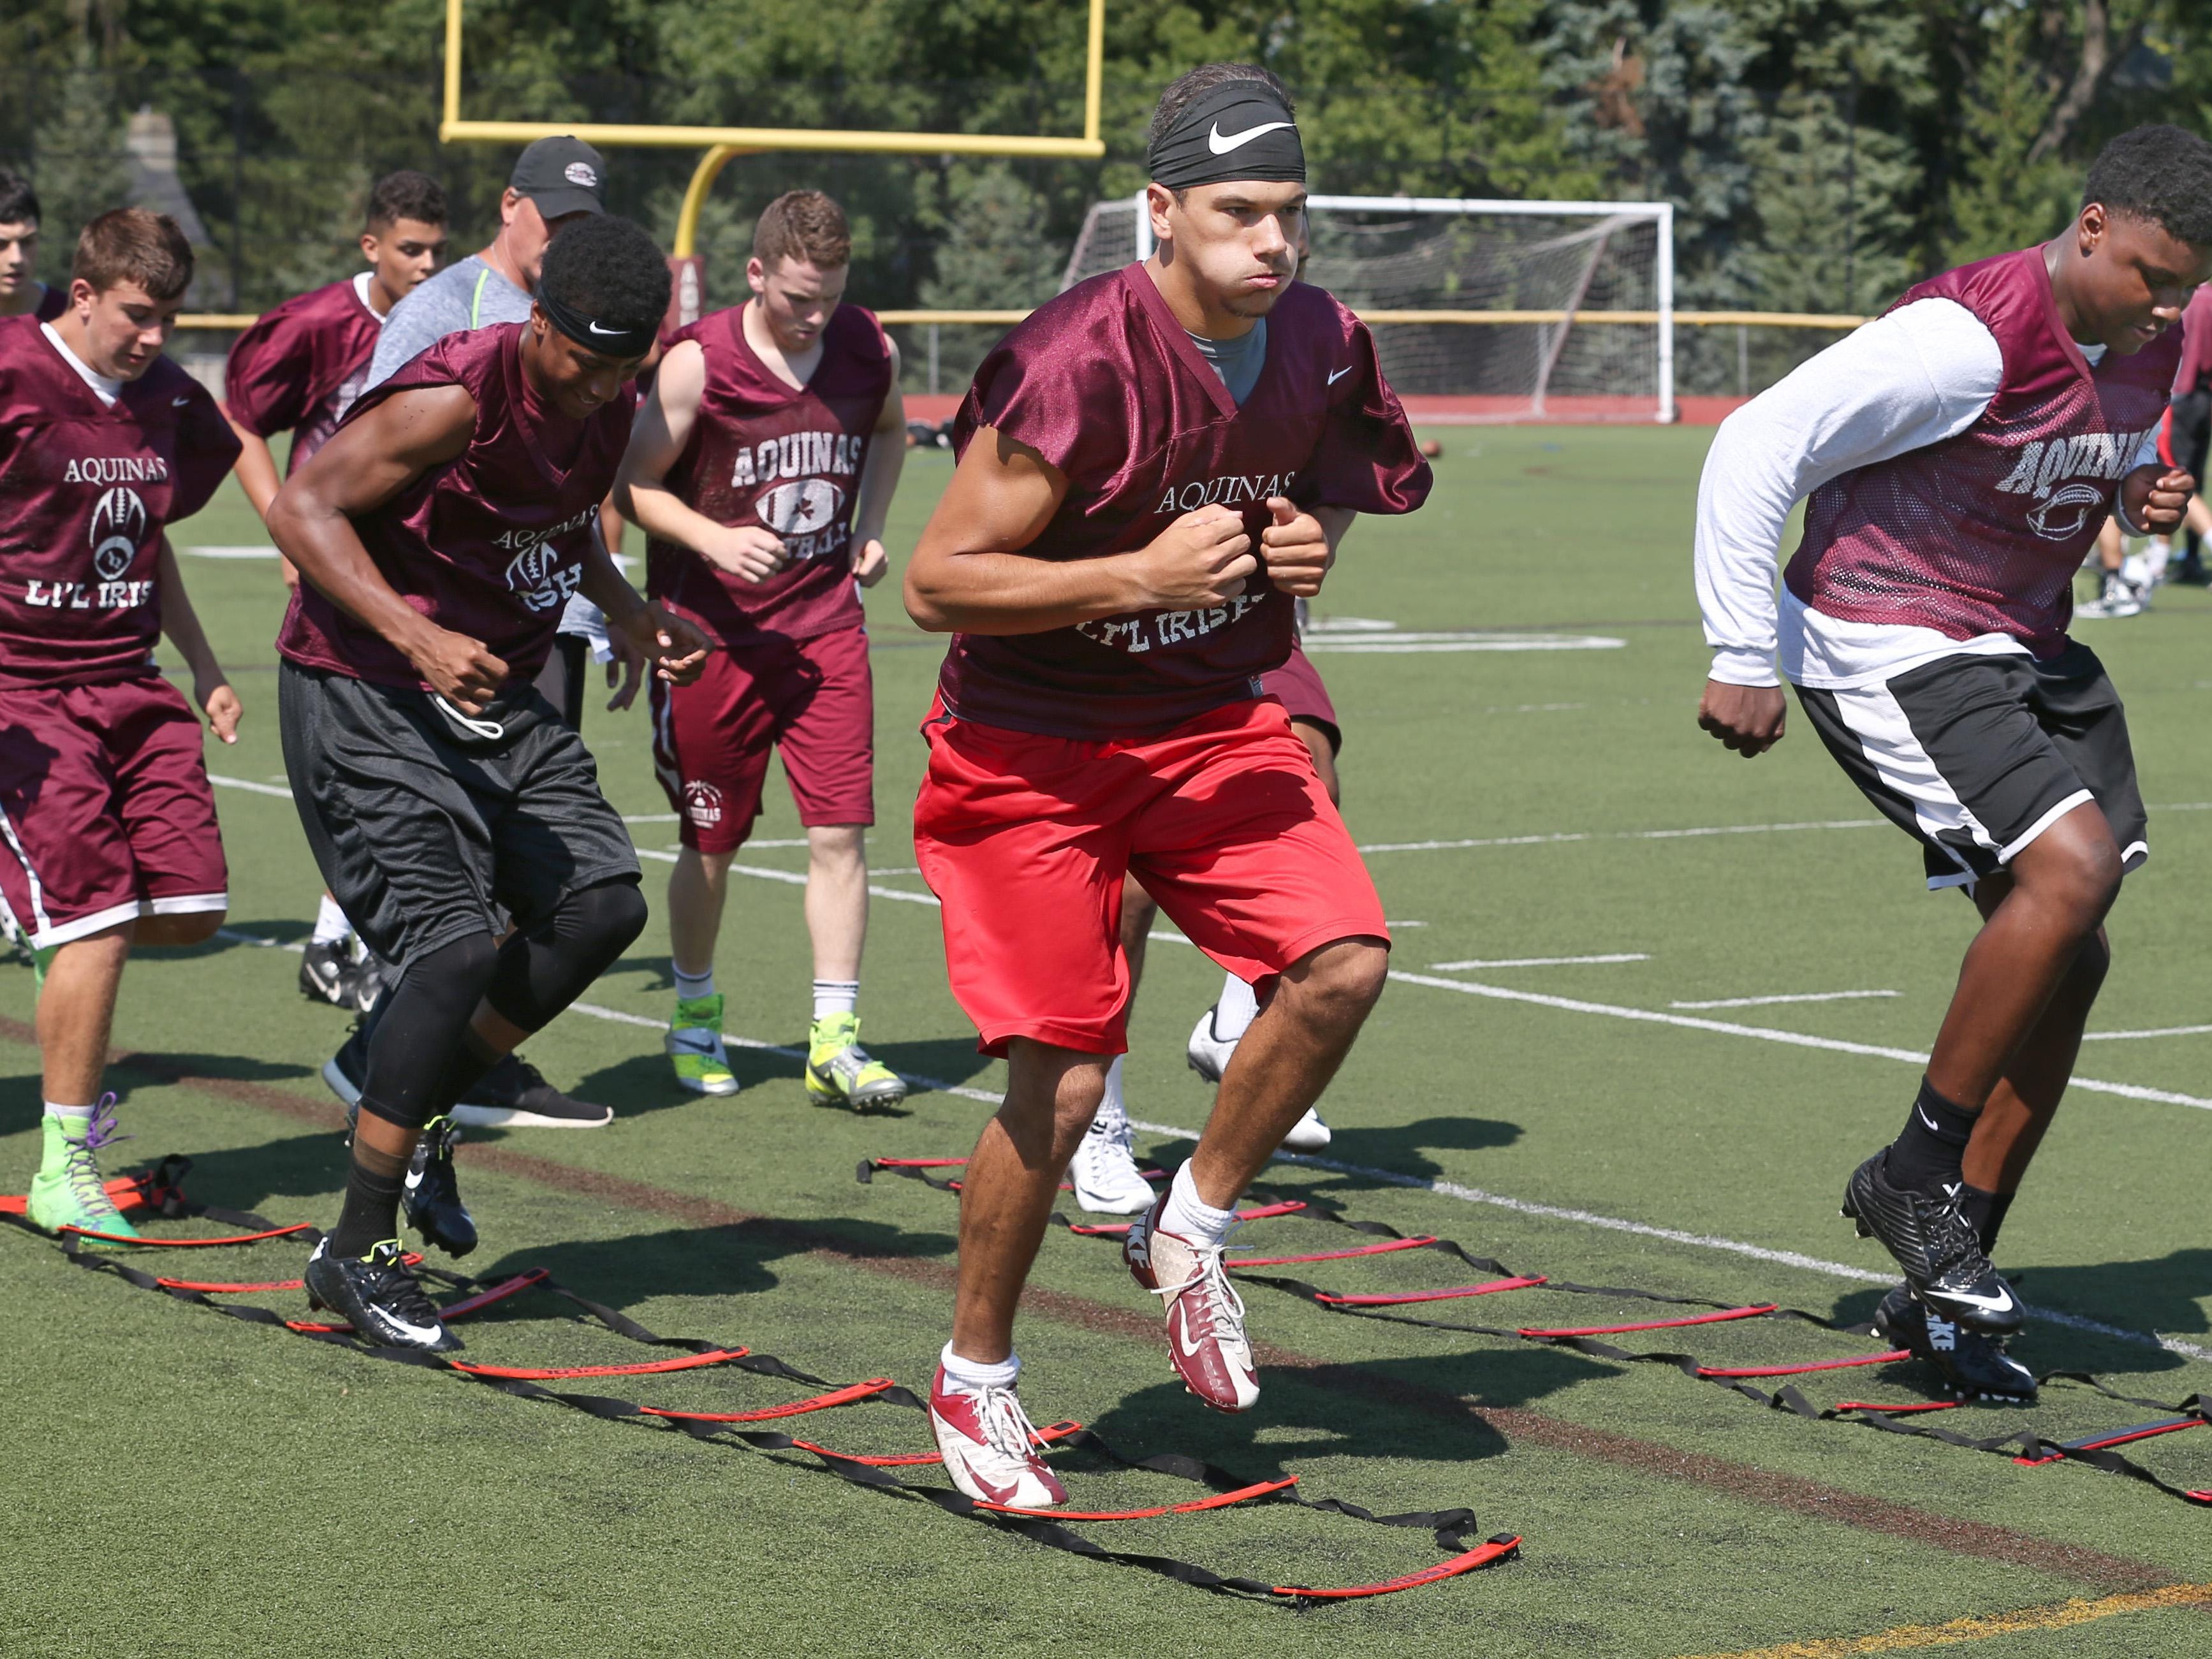 Aquinas QB Jake Zembiec and DE/LB Jamir Jones lead their teammates through the footwork agility drills on the opening day of high school football practices around Section V on Monday. Aquinas Institute is the first stop on the Democrat & Chronicle's high school football camp tour.